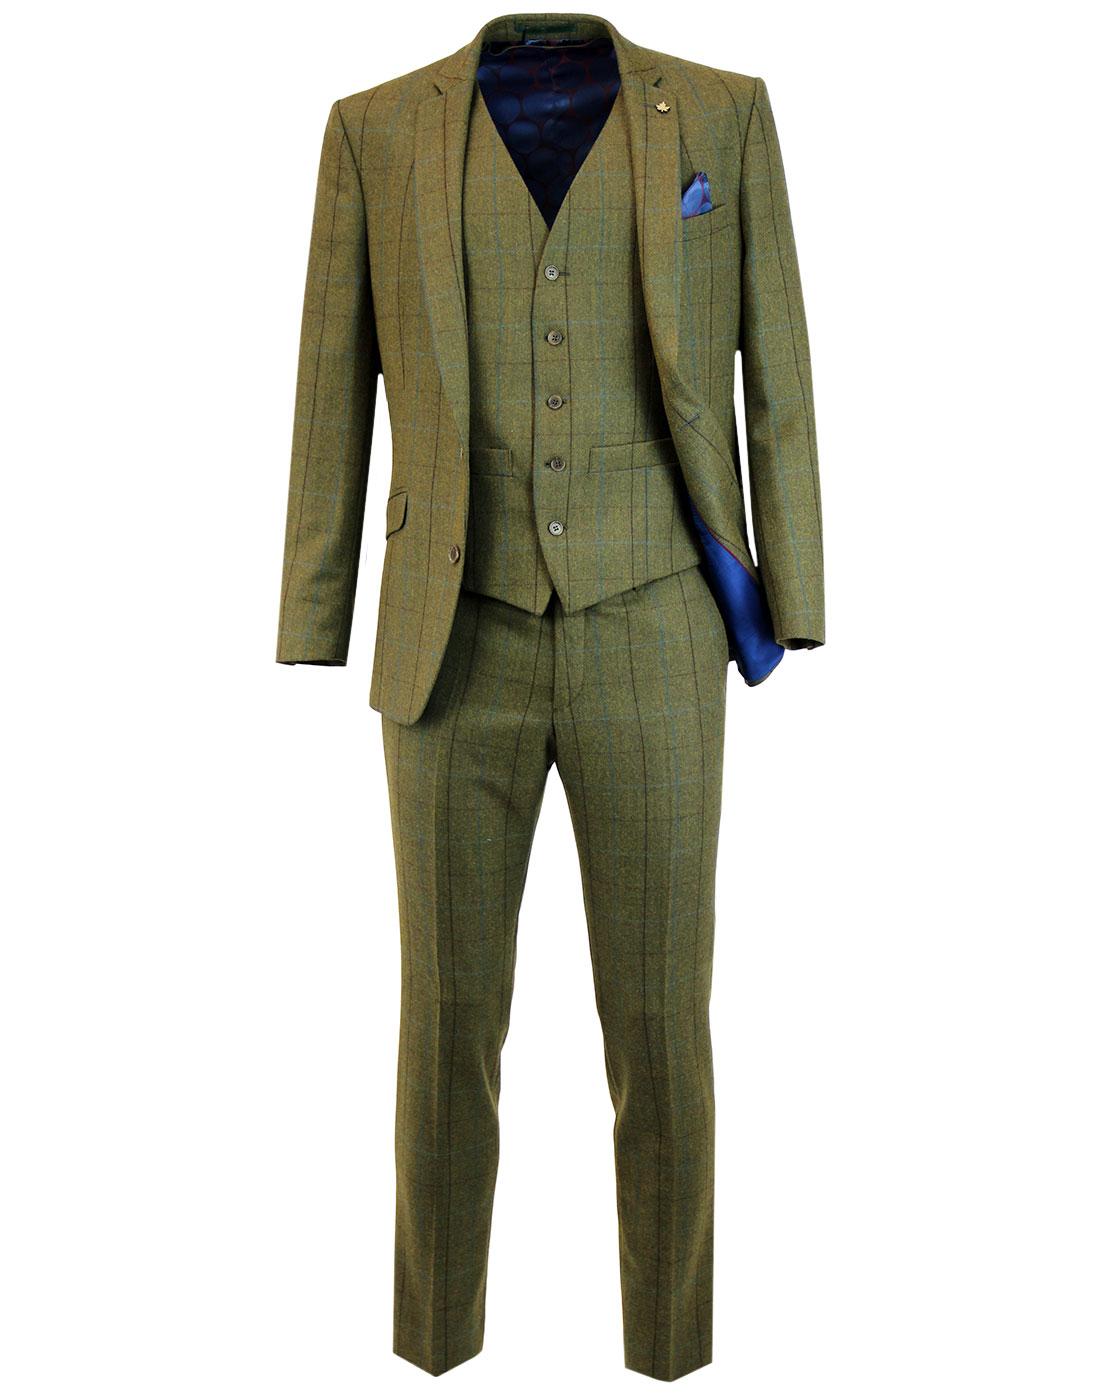 Retro Mod Windowpane Country Check Suit in Green